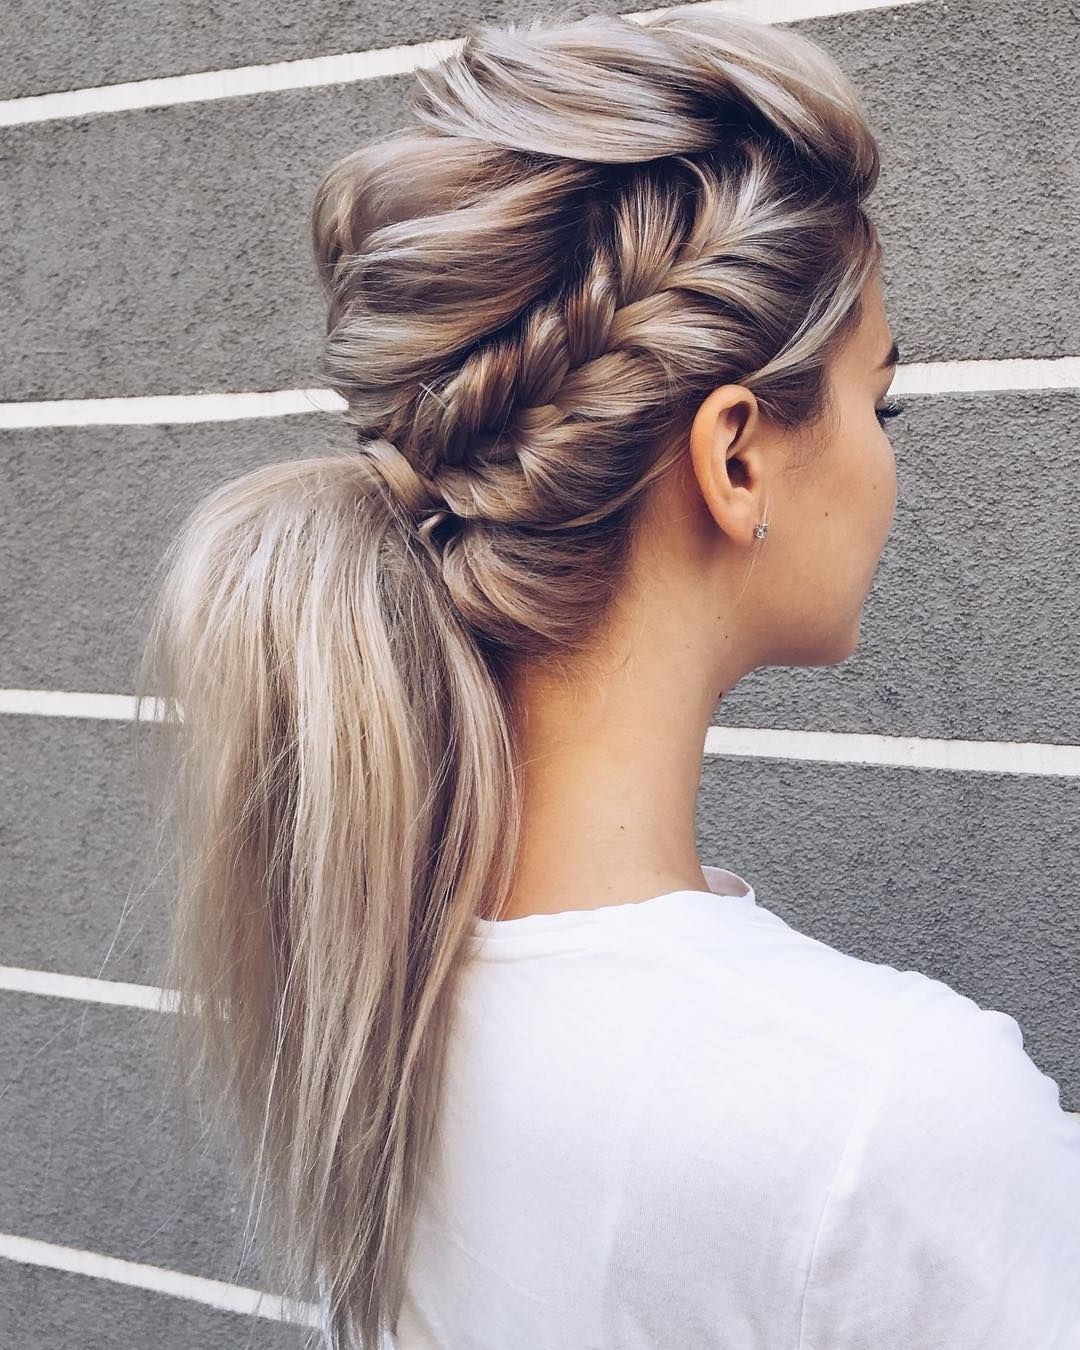 Beautiful Braid And Ponytail Hairstyle , Fishtail Braided Ponytail Throughout Best And Newest Pony Hairstyles With Textured Braid (View 2 of 20)